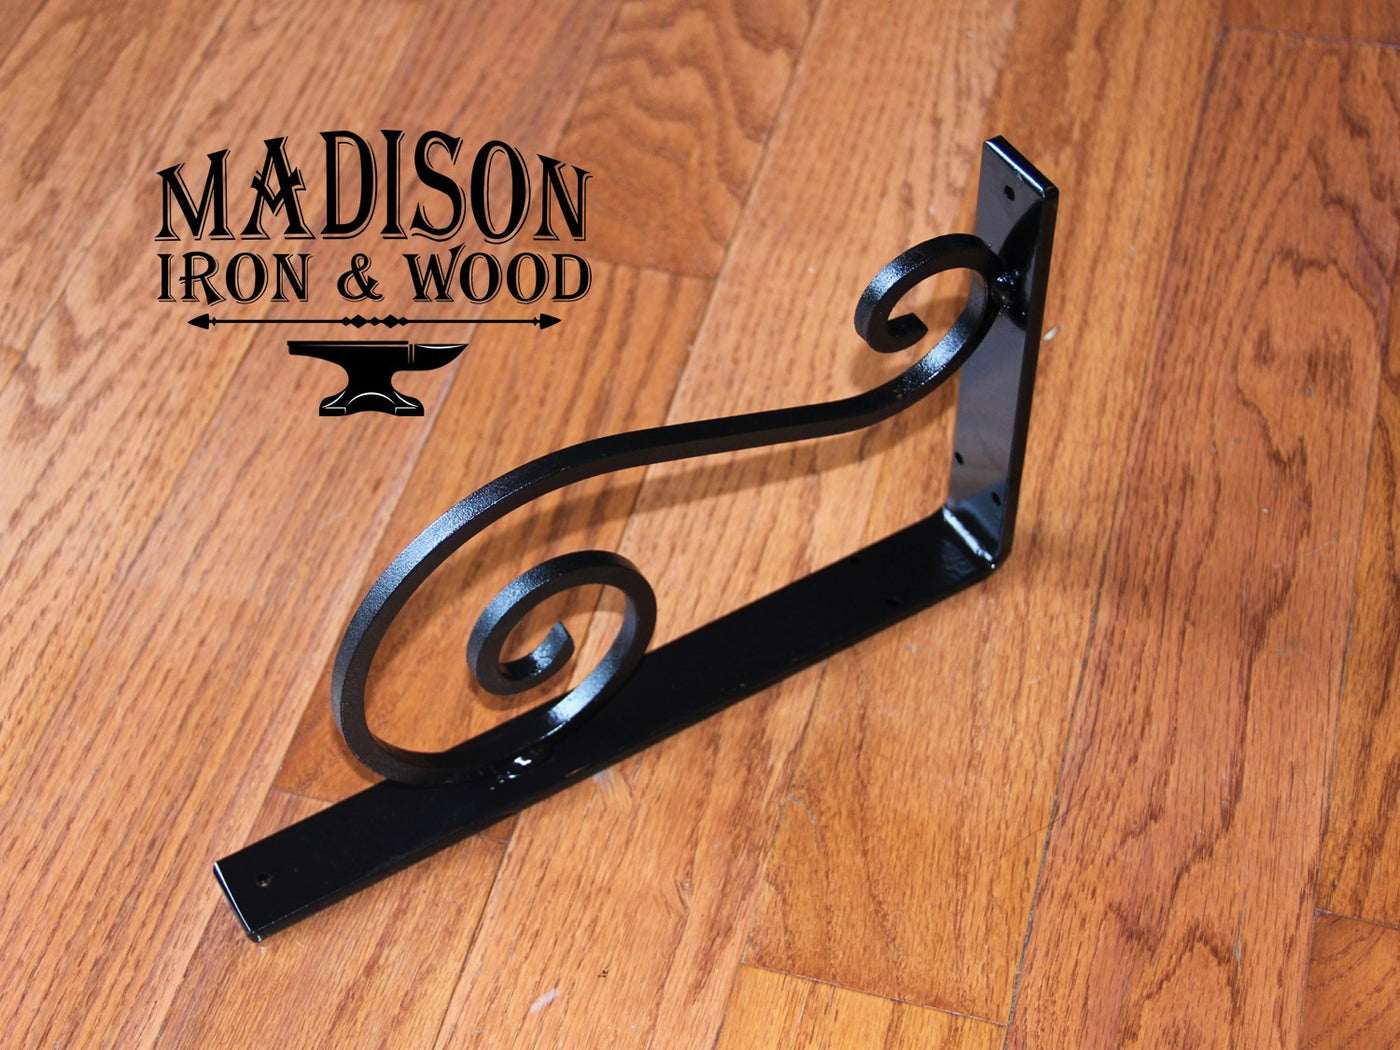 Heavy Duty Decorative S Scrolled Shelf Bracket, Forged Angle Bracket - Madison Iron and Wood - Shelf Brackets - metal outdoor decor - Steel deocrations - american made products - veteran owned business products - fencing decorations - fencing supplies - custom wall decorations - personalized wall signs - steel - decorative post caps - steel post caps - metal post caps - brackets - structural brackets - home improvement - easter - easter decorations - easter gift - easter yard decor